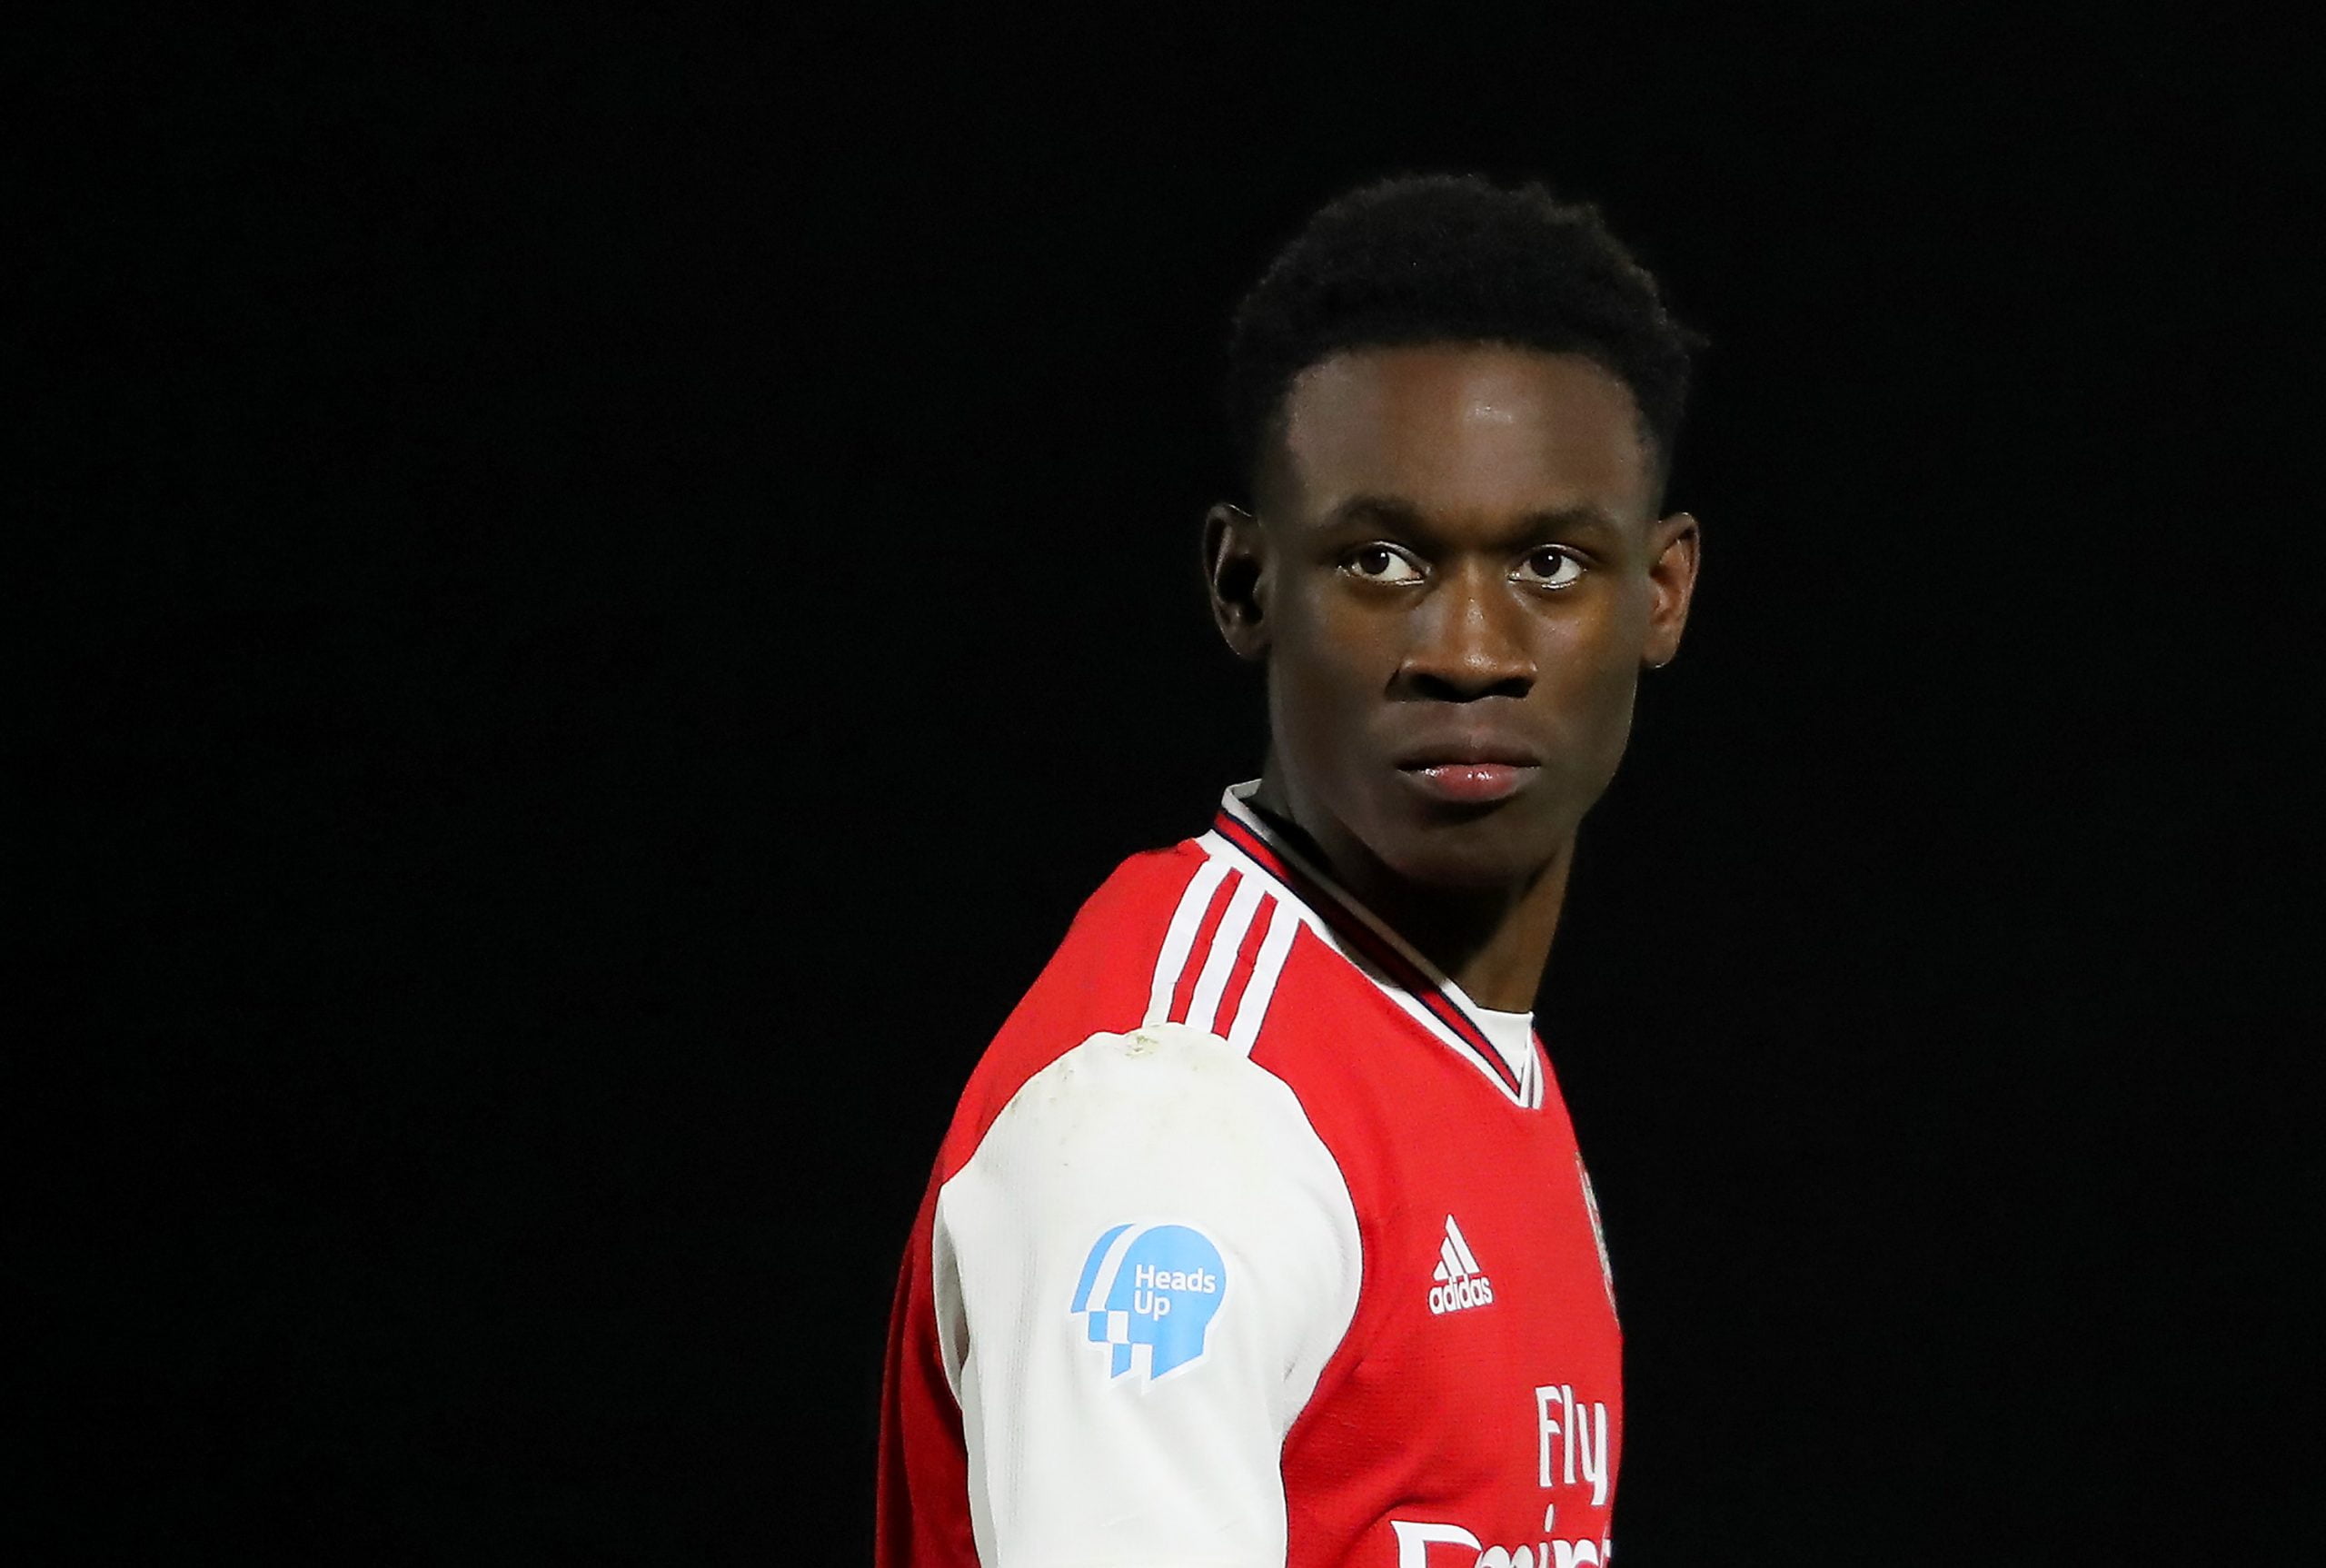 Arsenal have begun talks with Folarin Balogun over a new contract - A star in the making.